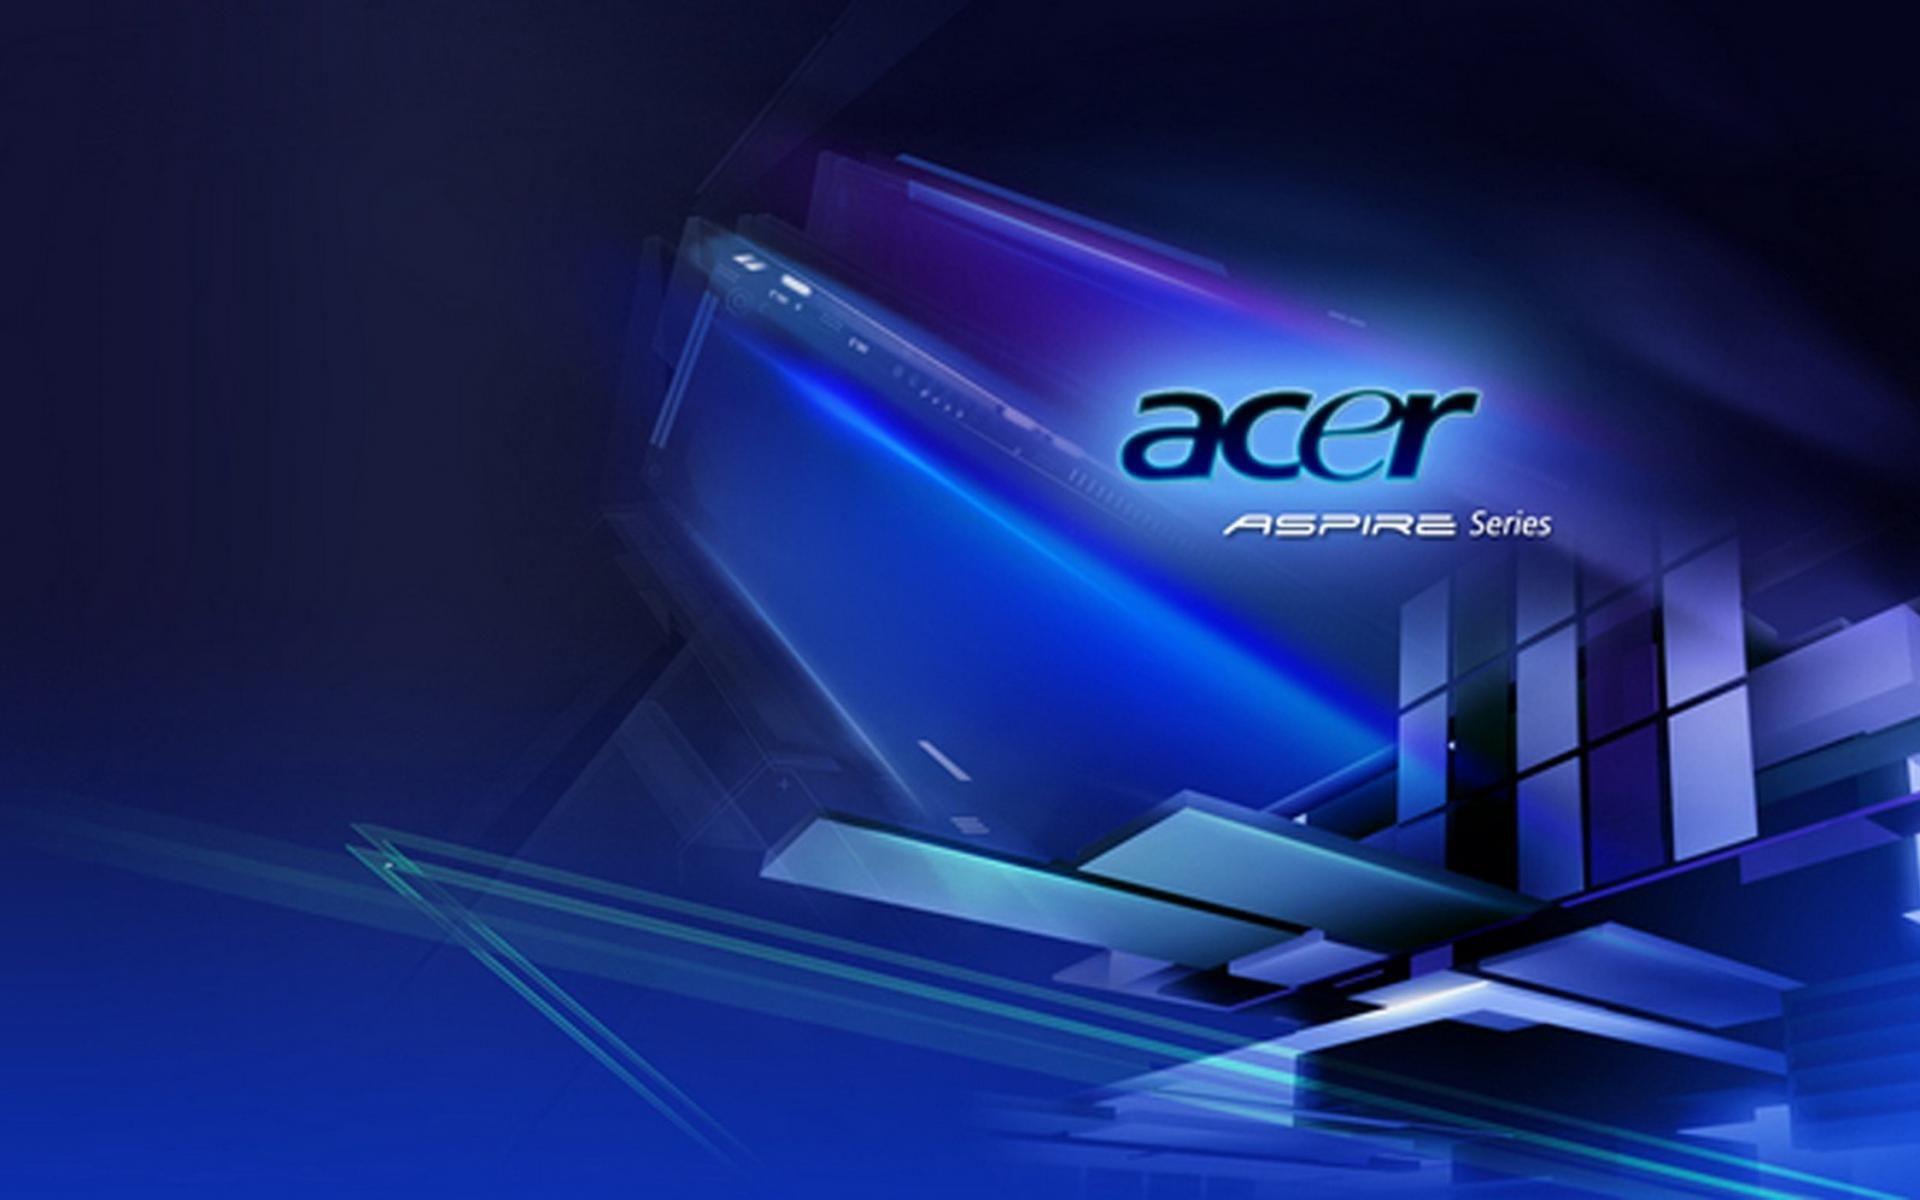 Acer Aspire Series Blue Background Wallpaper. Download cool HD